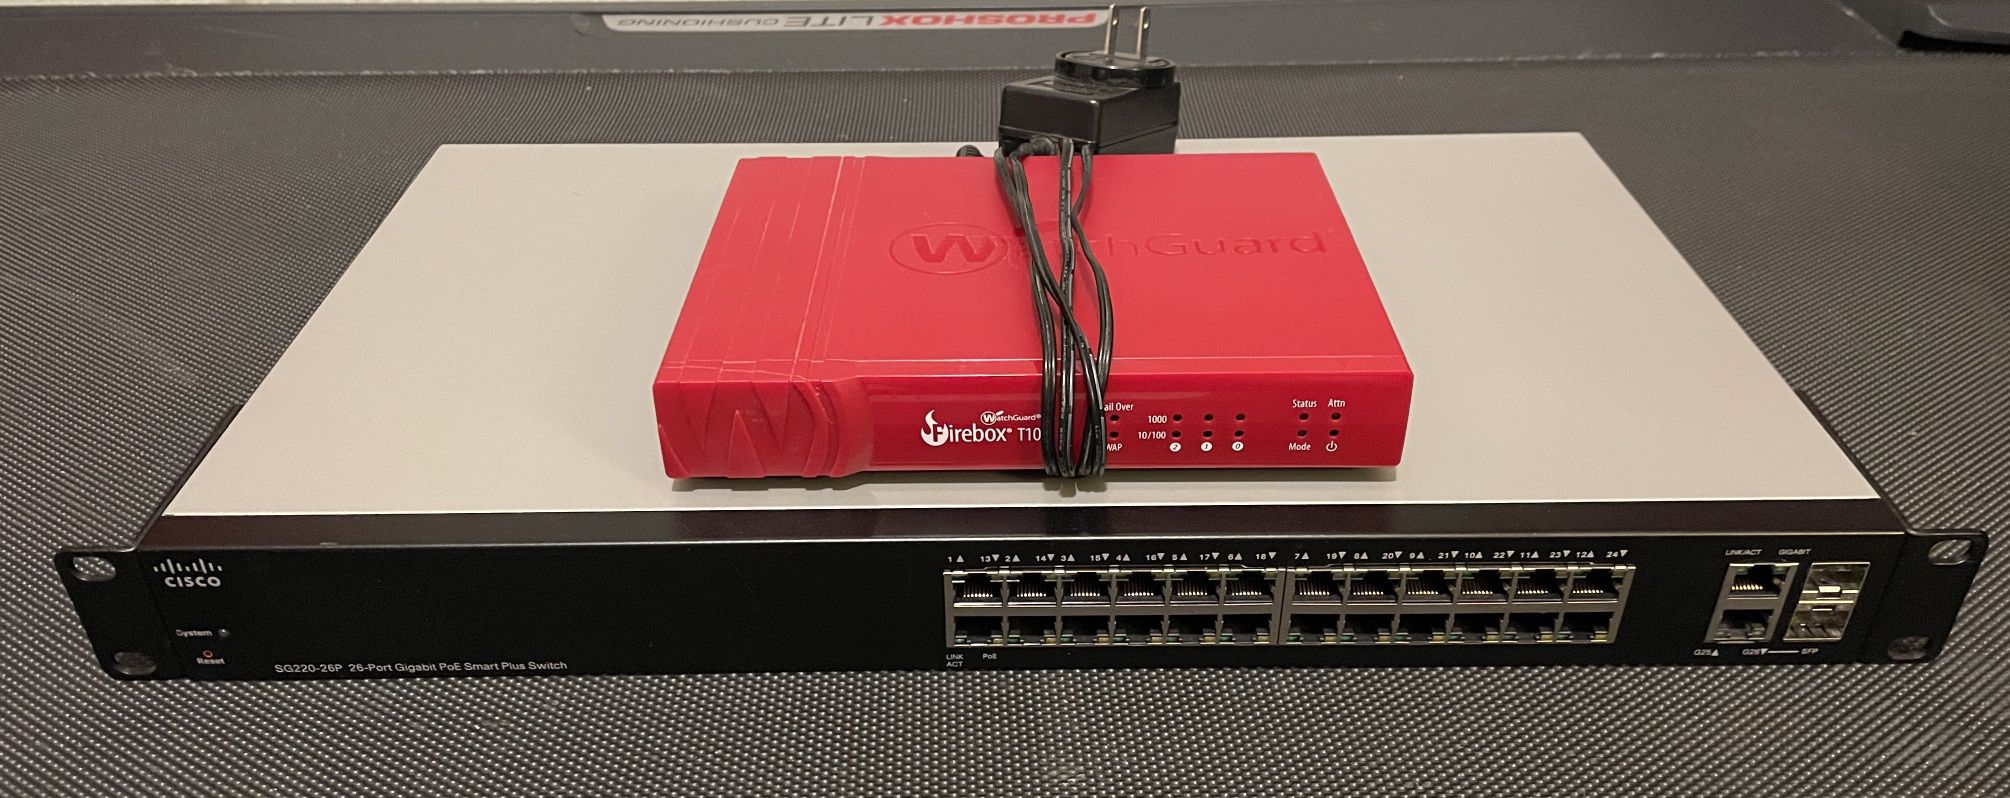 Cisco SG220-26P PoE Switch and WireGuard Firebox T10